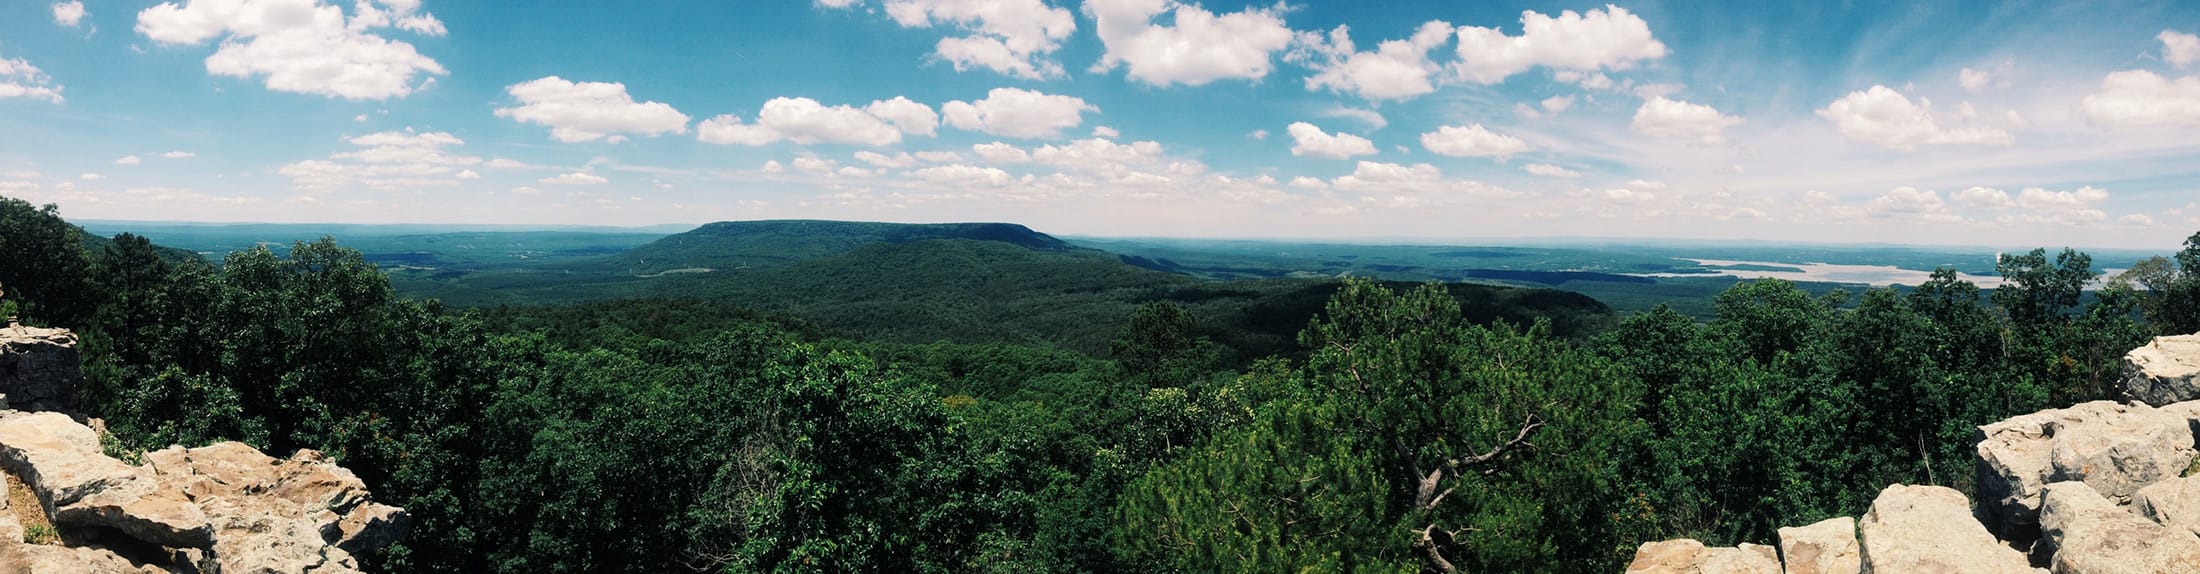 Mt Nebo - Sunset Point "This panoramic photo was taken atop Mt. Nebo (Dardanelle, AR) in early June." - Eddie Vansell